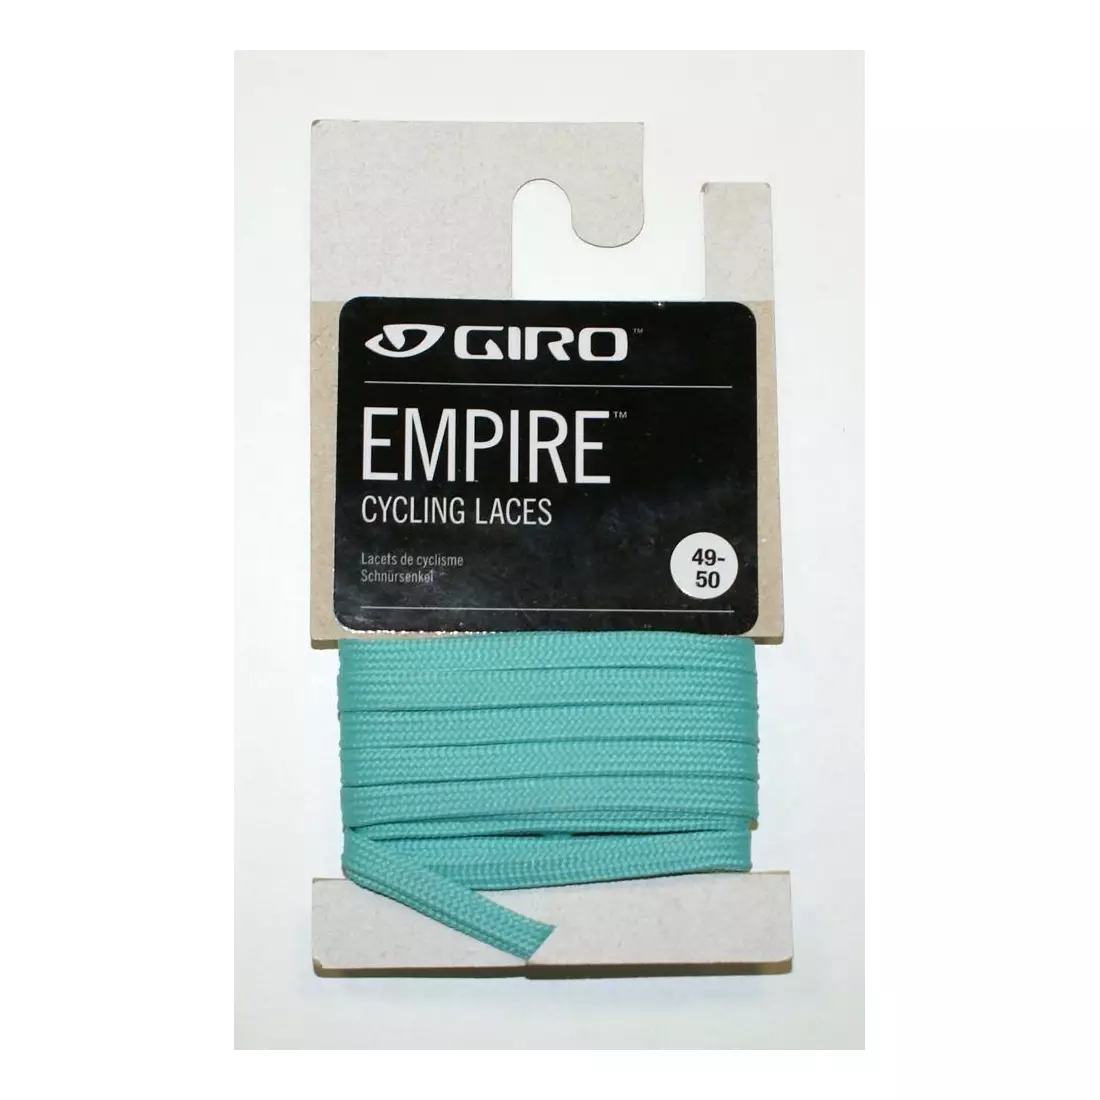 GIRO laces for cycling shoes EMPIRE LACES turquoise GR-7084153